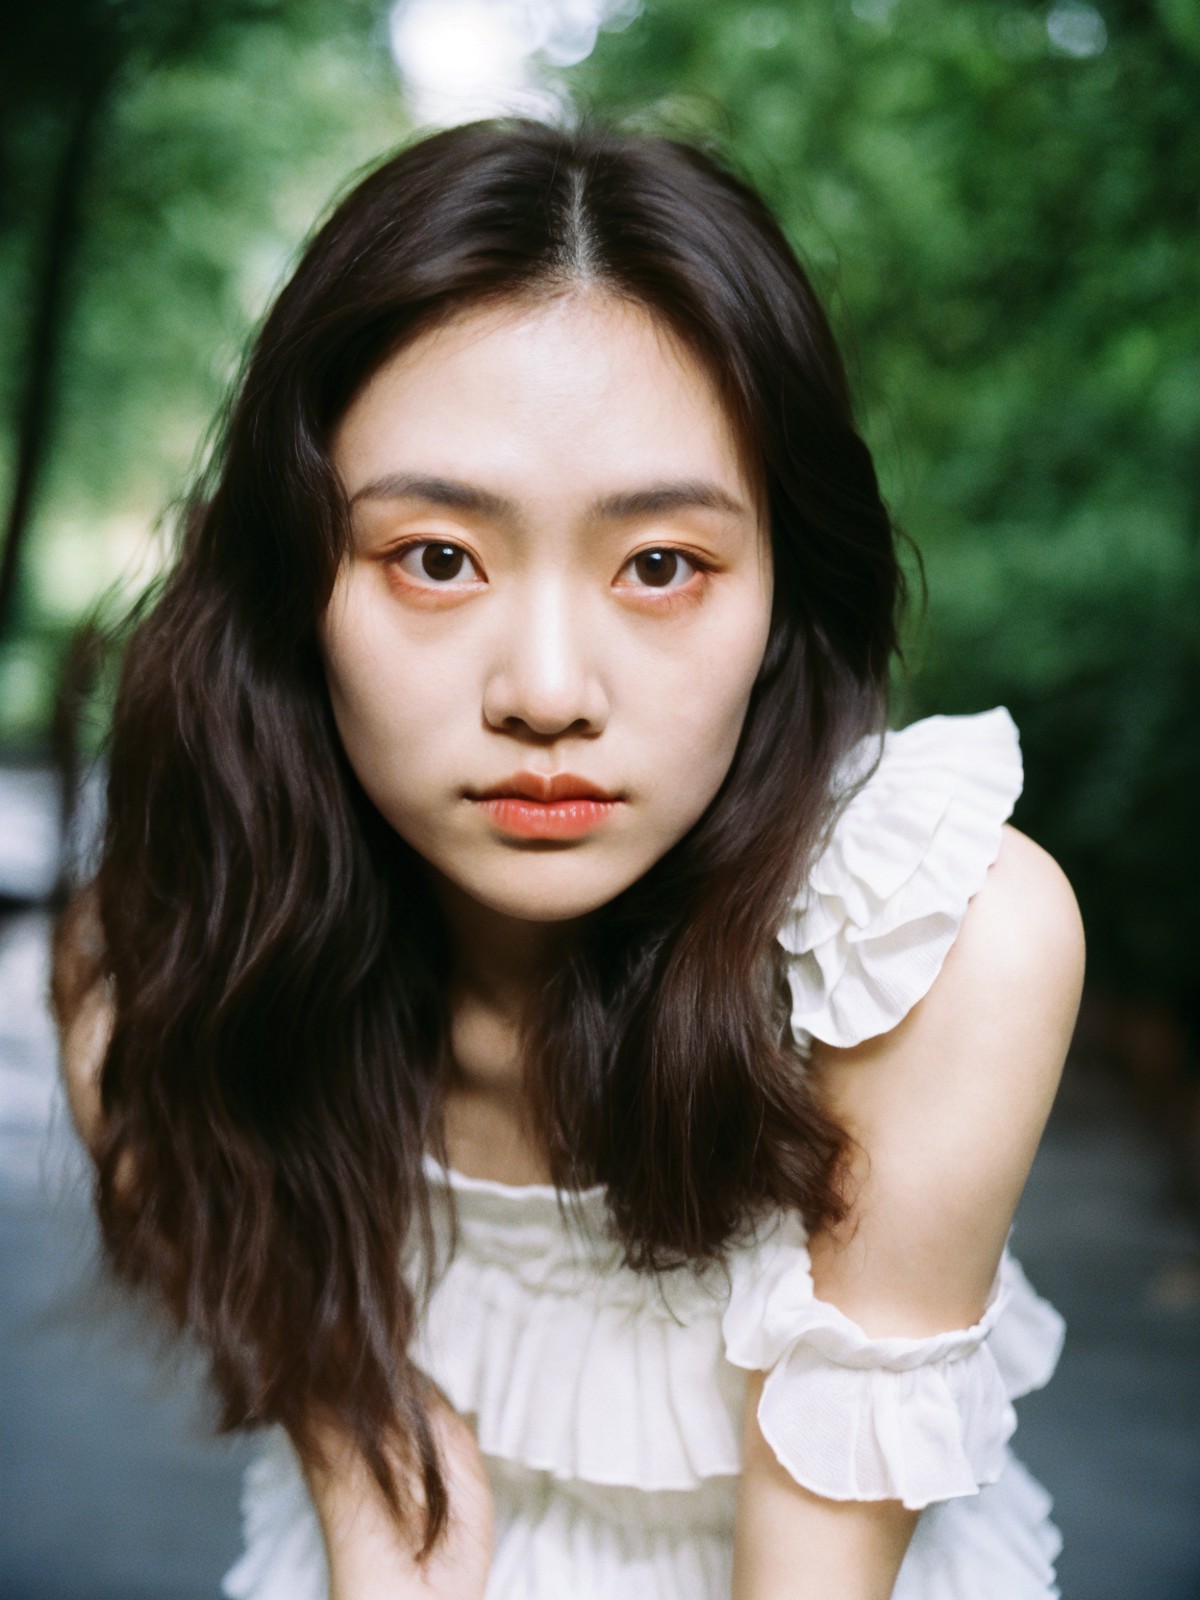 film grain analog photography,captured vertical frame, young asian woman gazes upwards look curiosity, large eyes lively p...